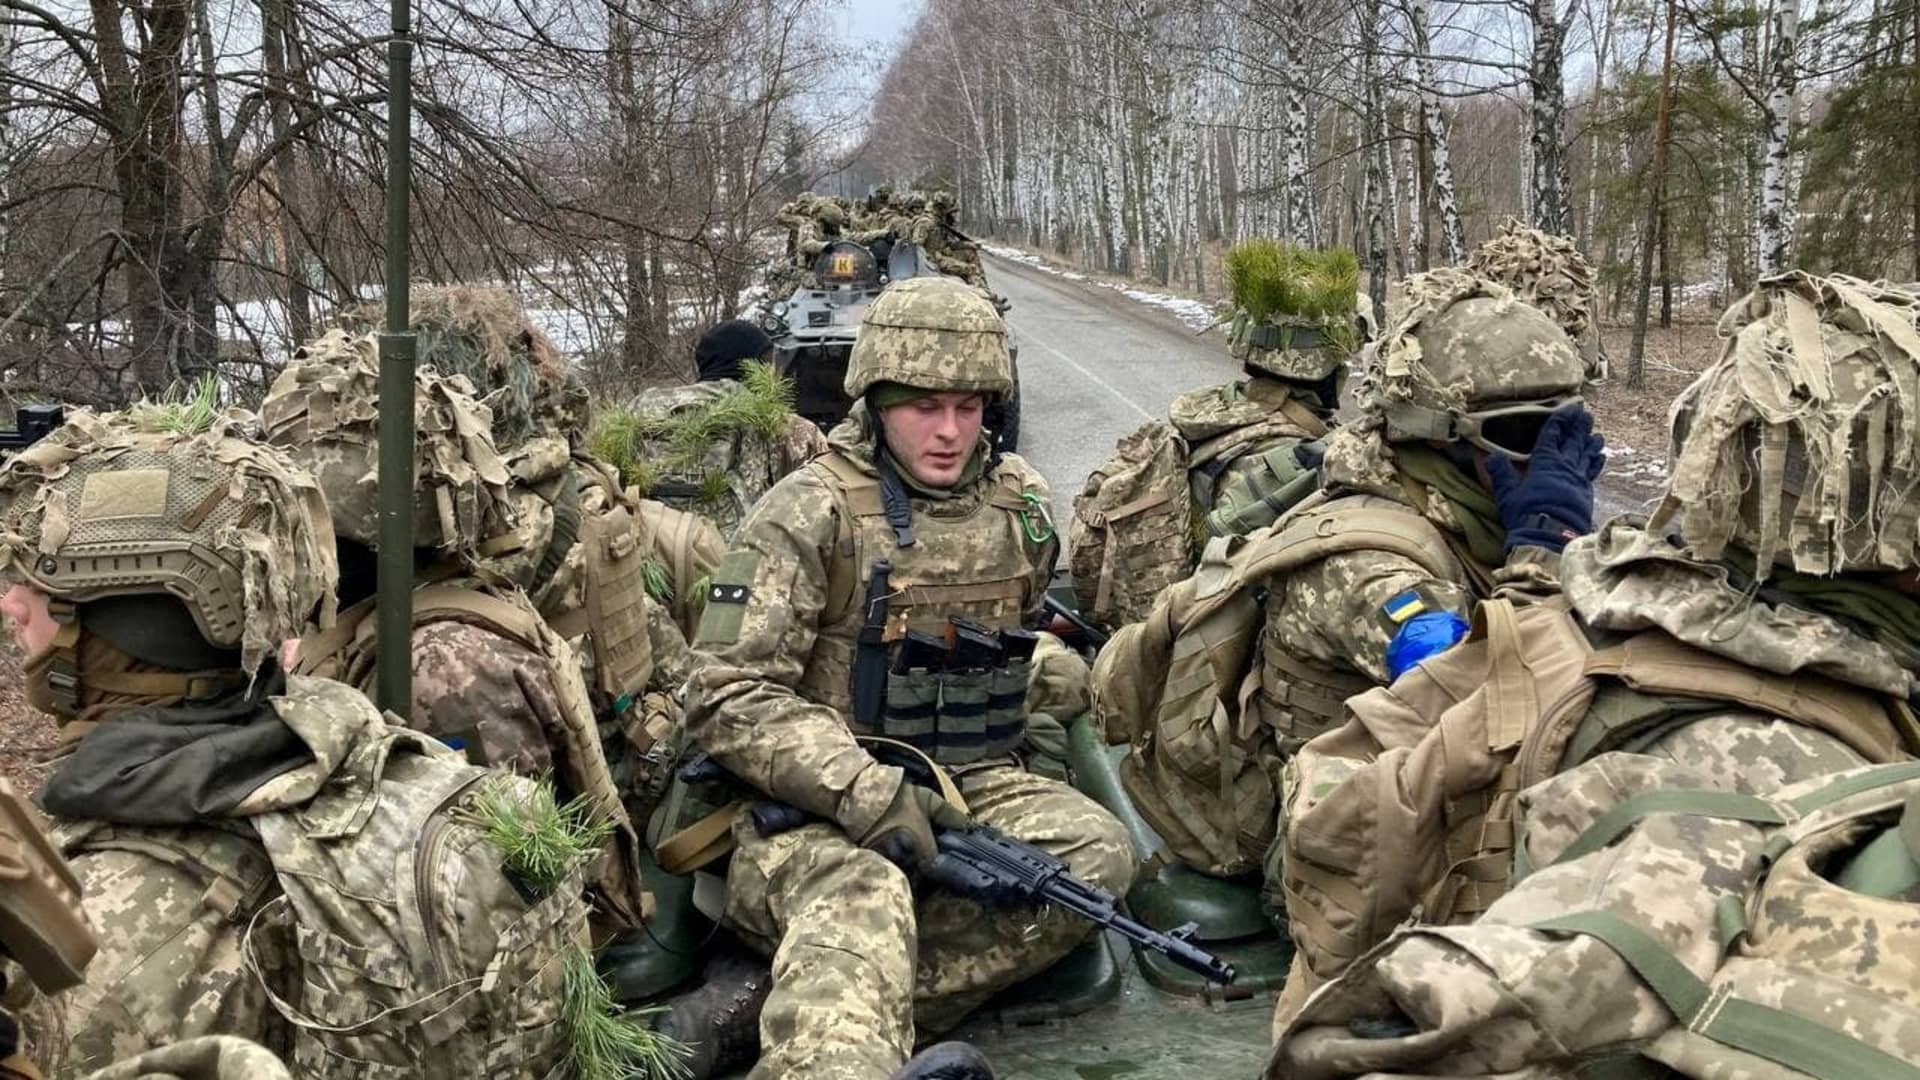 Service members of the Ukrainian Air Assault Forces take part in tactical drills at a training ground in an unknown location in Ukraine, in this handout picture released February 18, 2022.